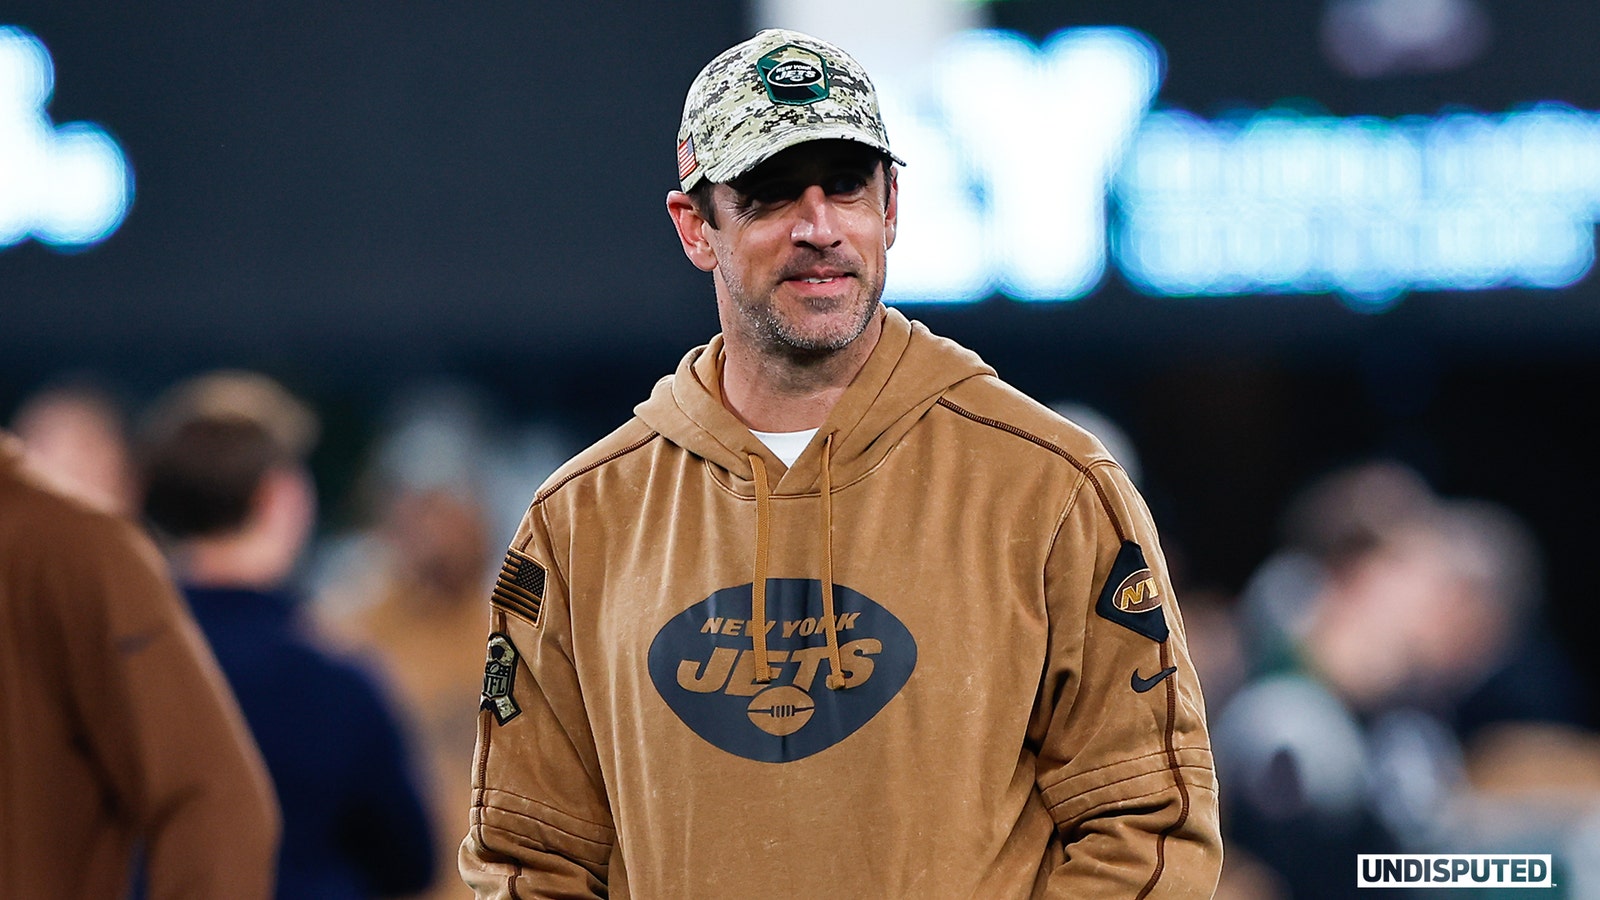 Aaron Rodgers: "Give me a few weeks" to come back from Achilles injury